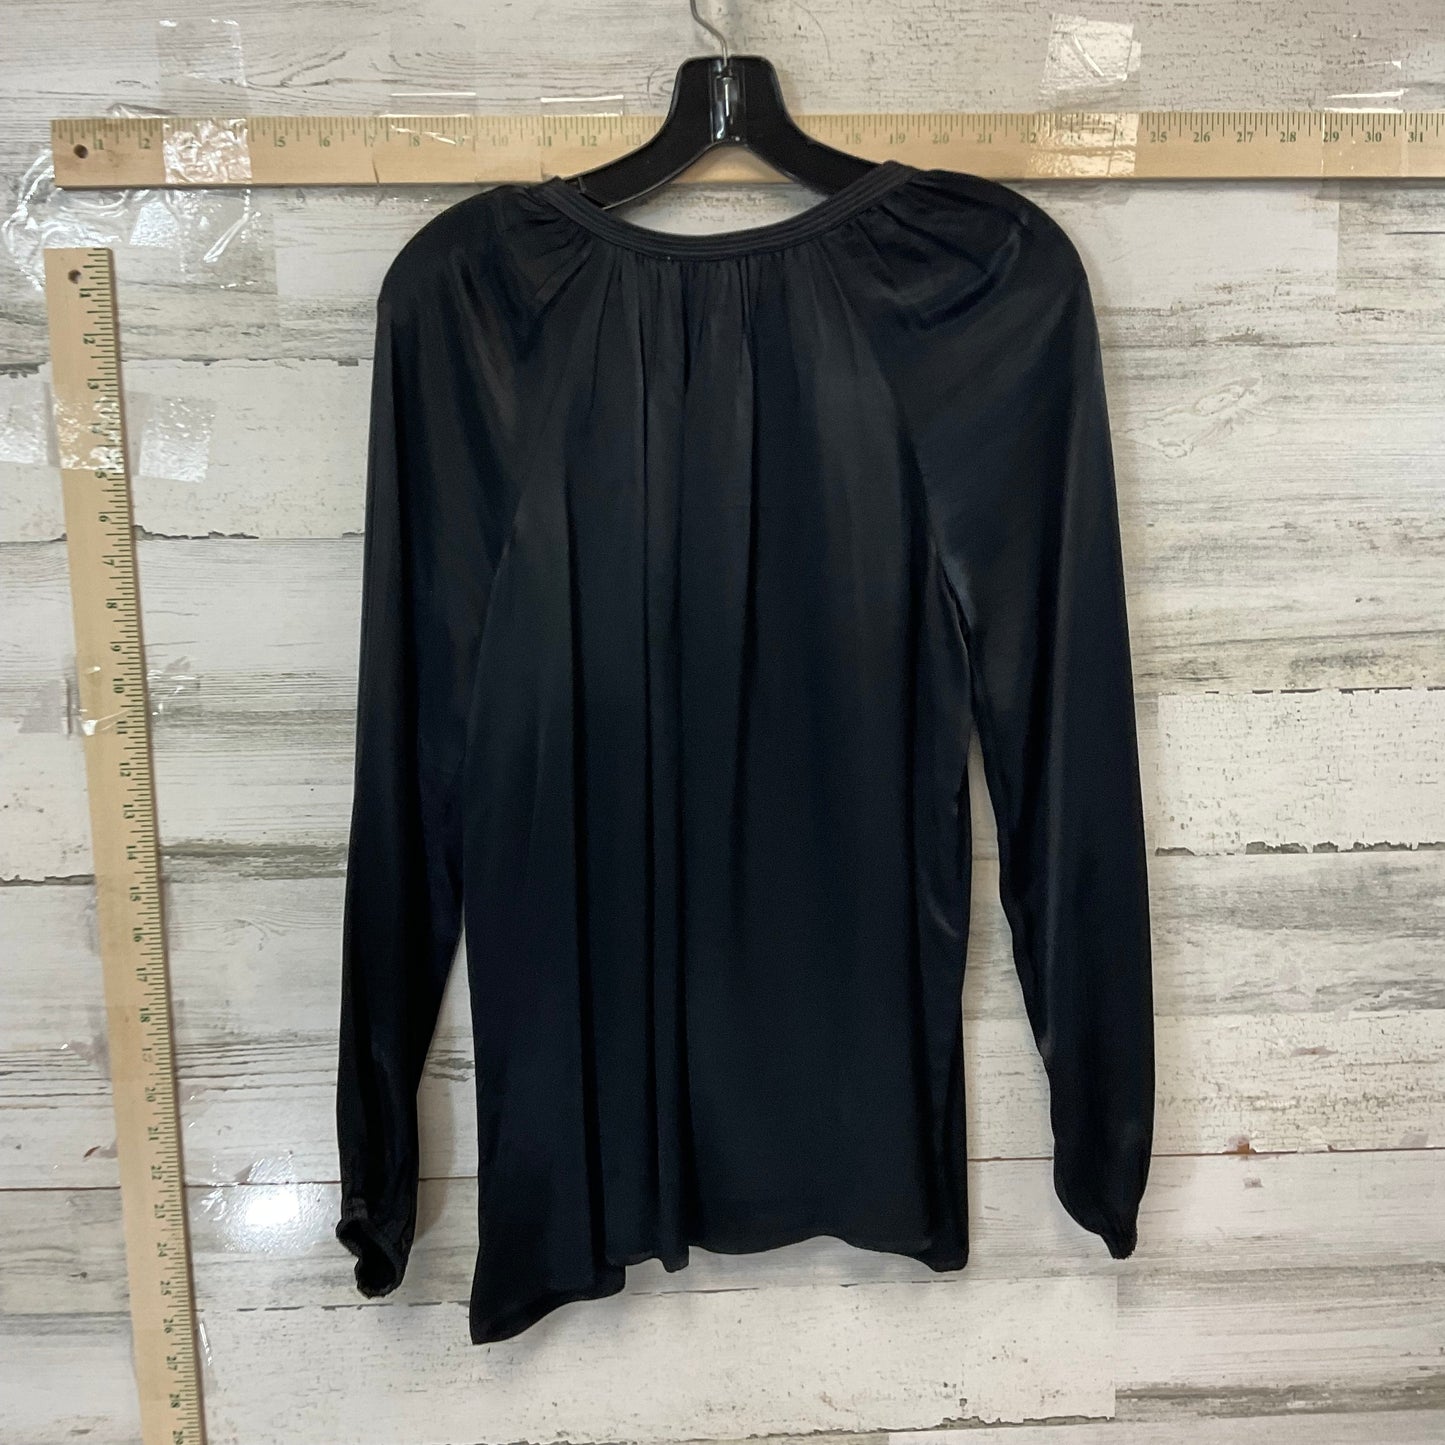 Black Top Long Sleeve Johnny Was, Size Xs